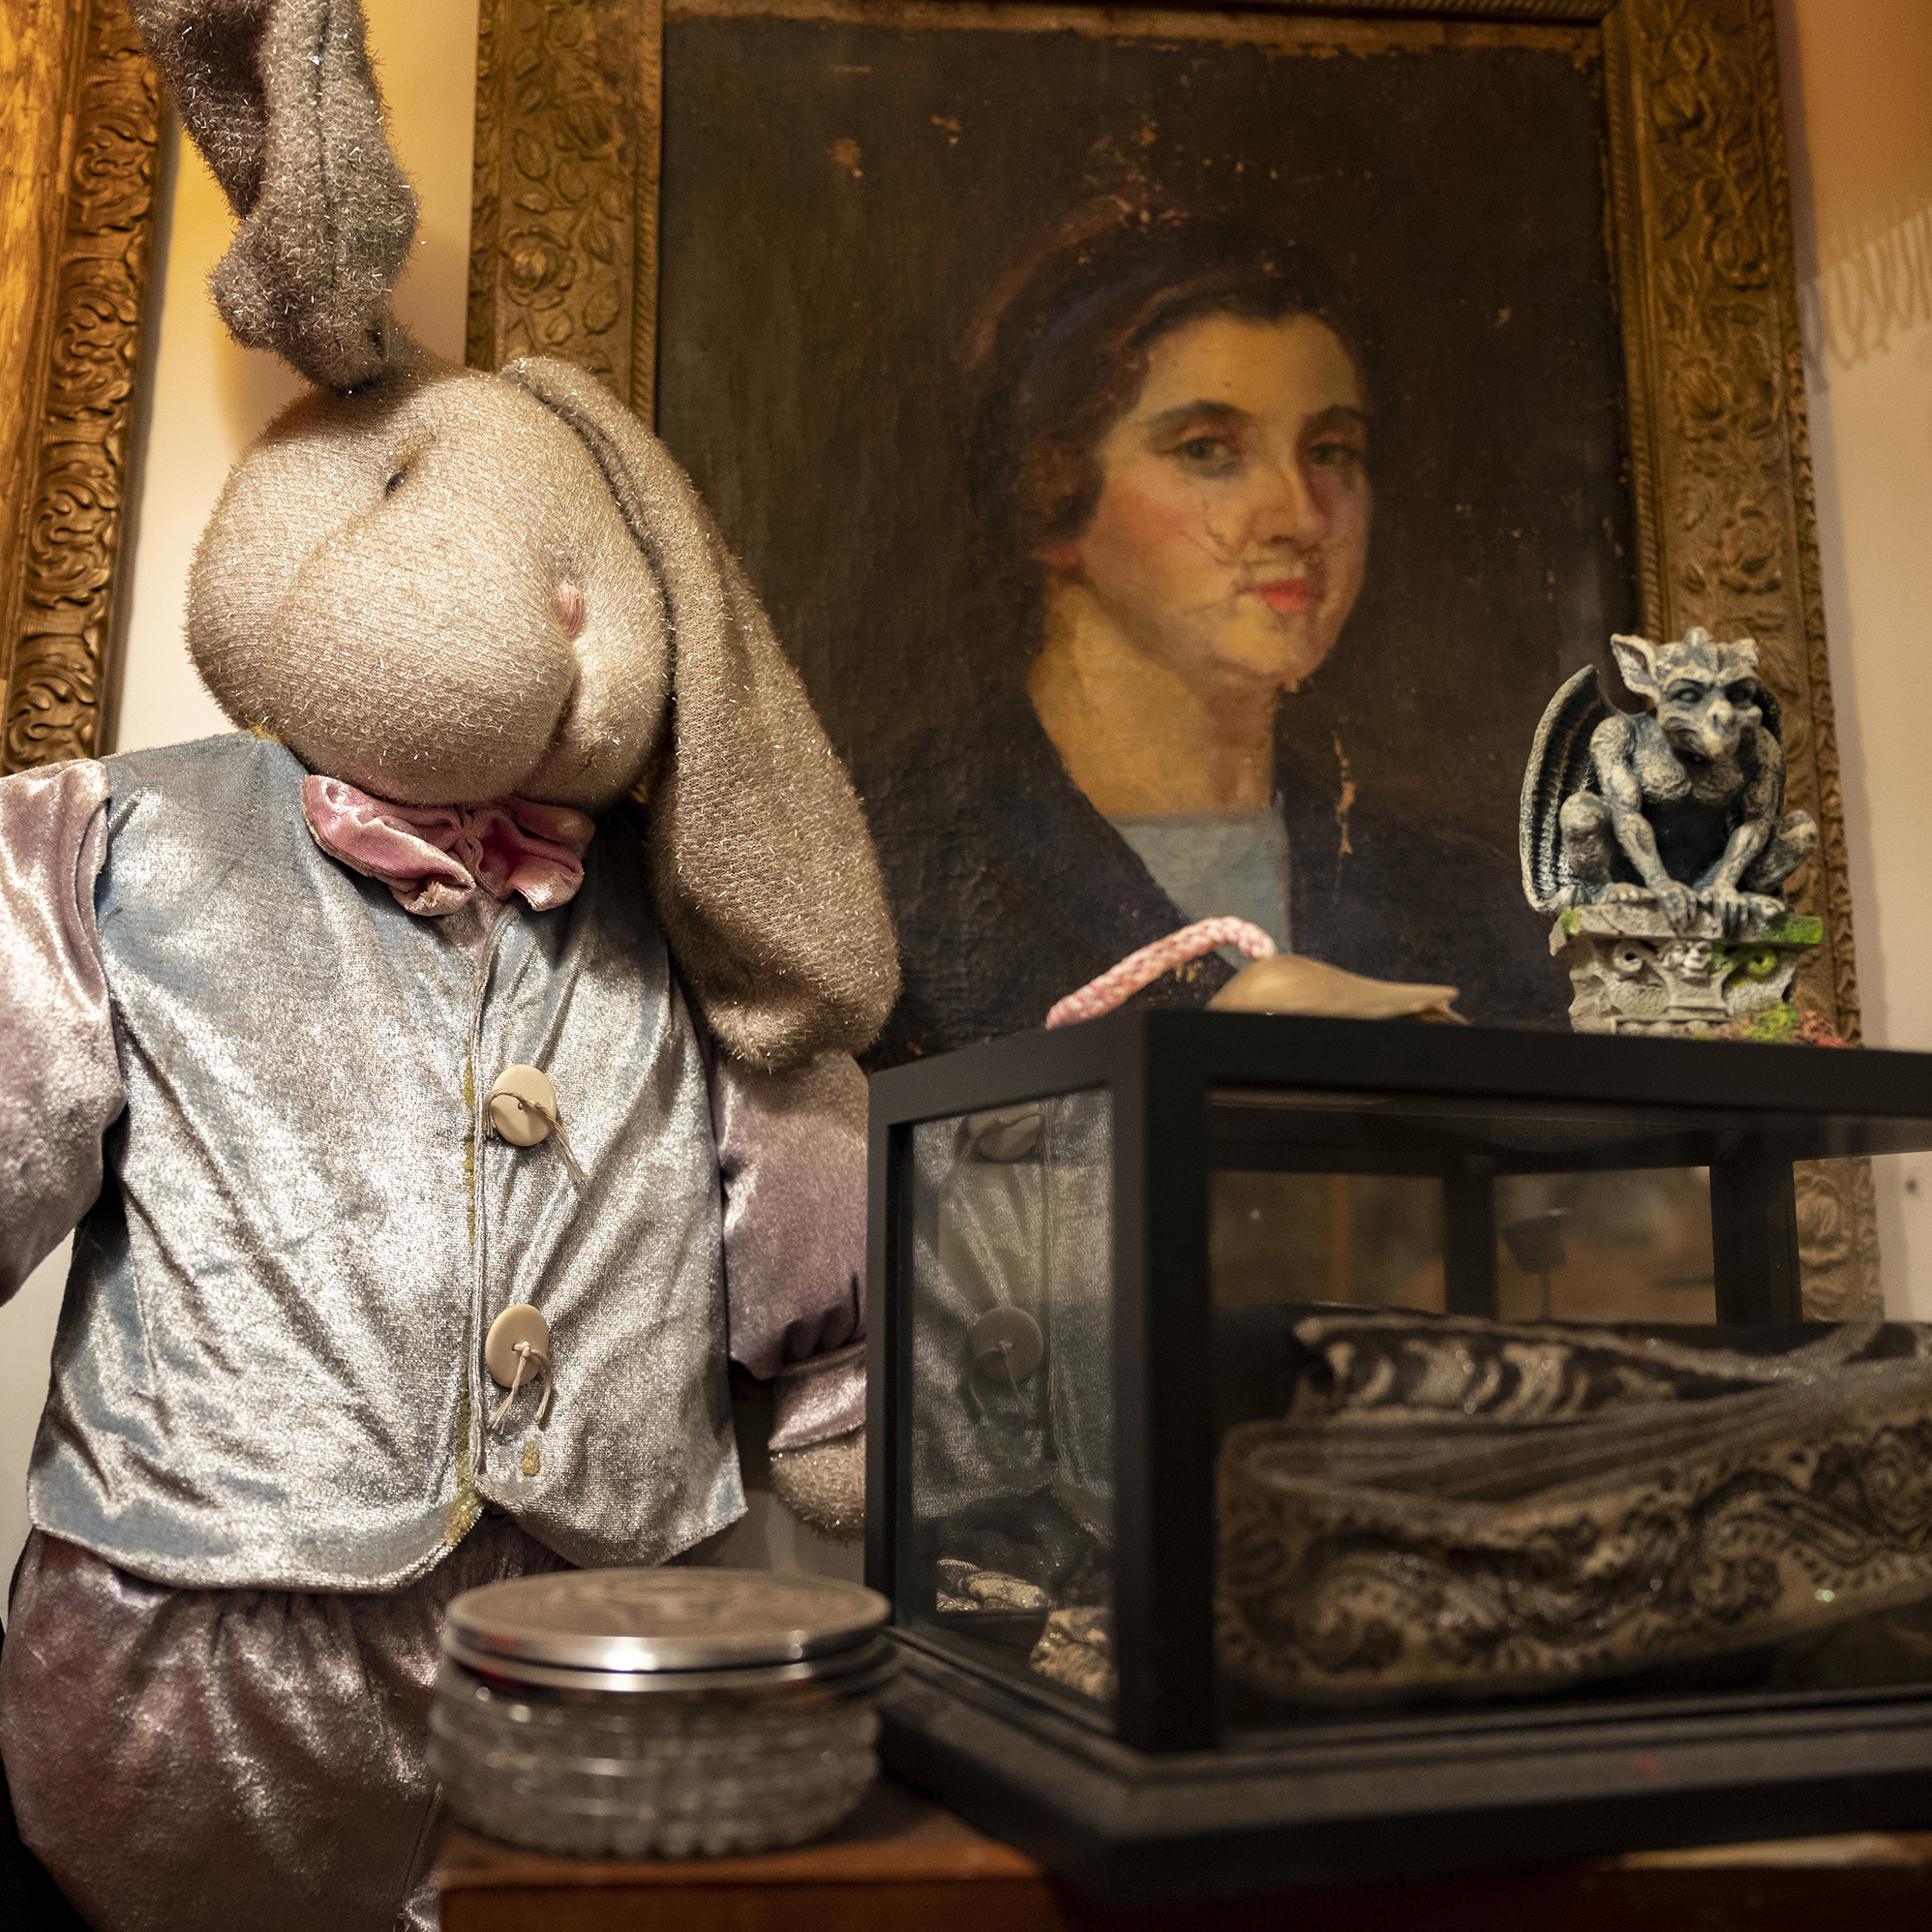 Haunted artifacts & serial killer art: When one person's treasure is another one's nightmare